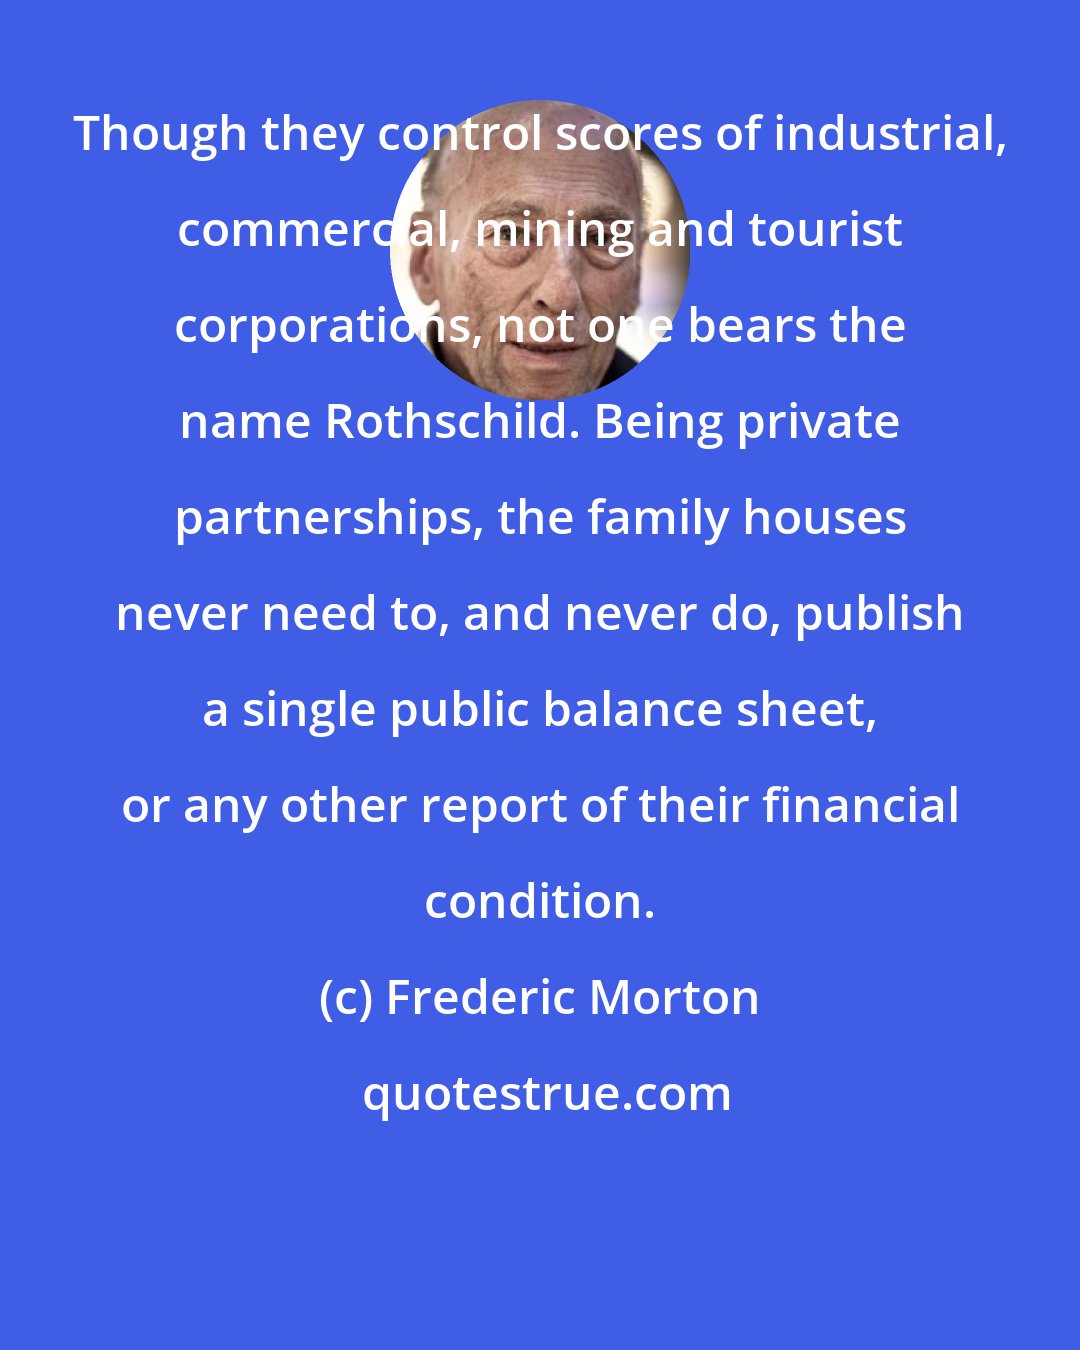 Frederic Morton: Though they control scores of industrial, commercial, mining and tourist corporations, not one bears the name Rothschild. Being private partnerships, the family houses never need to, and never do, publish a single public balance sheet, or any other report of their financial condition.